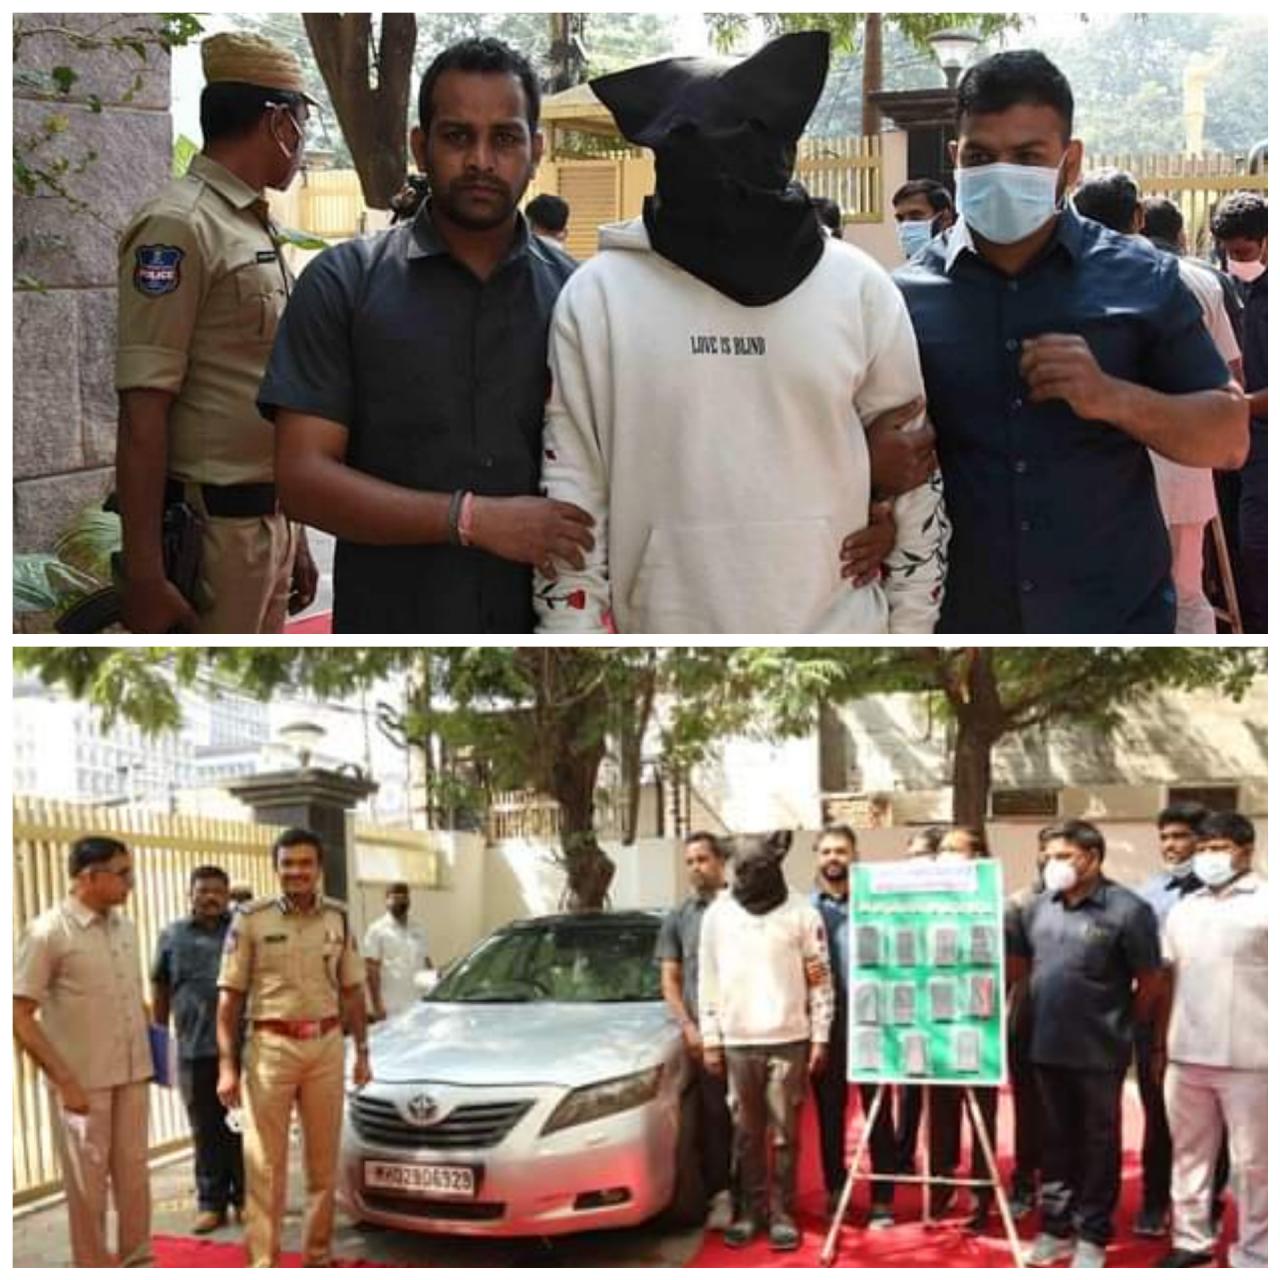 Most wanted Nigerian drug peddler arrested in India (video)